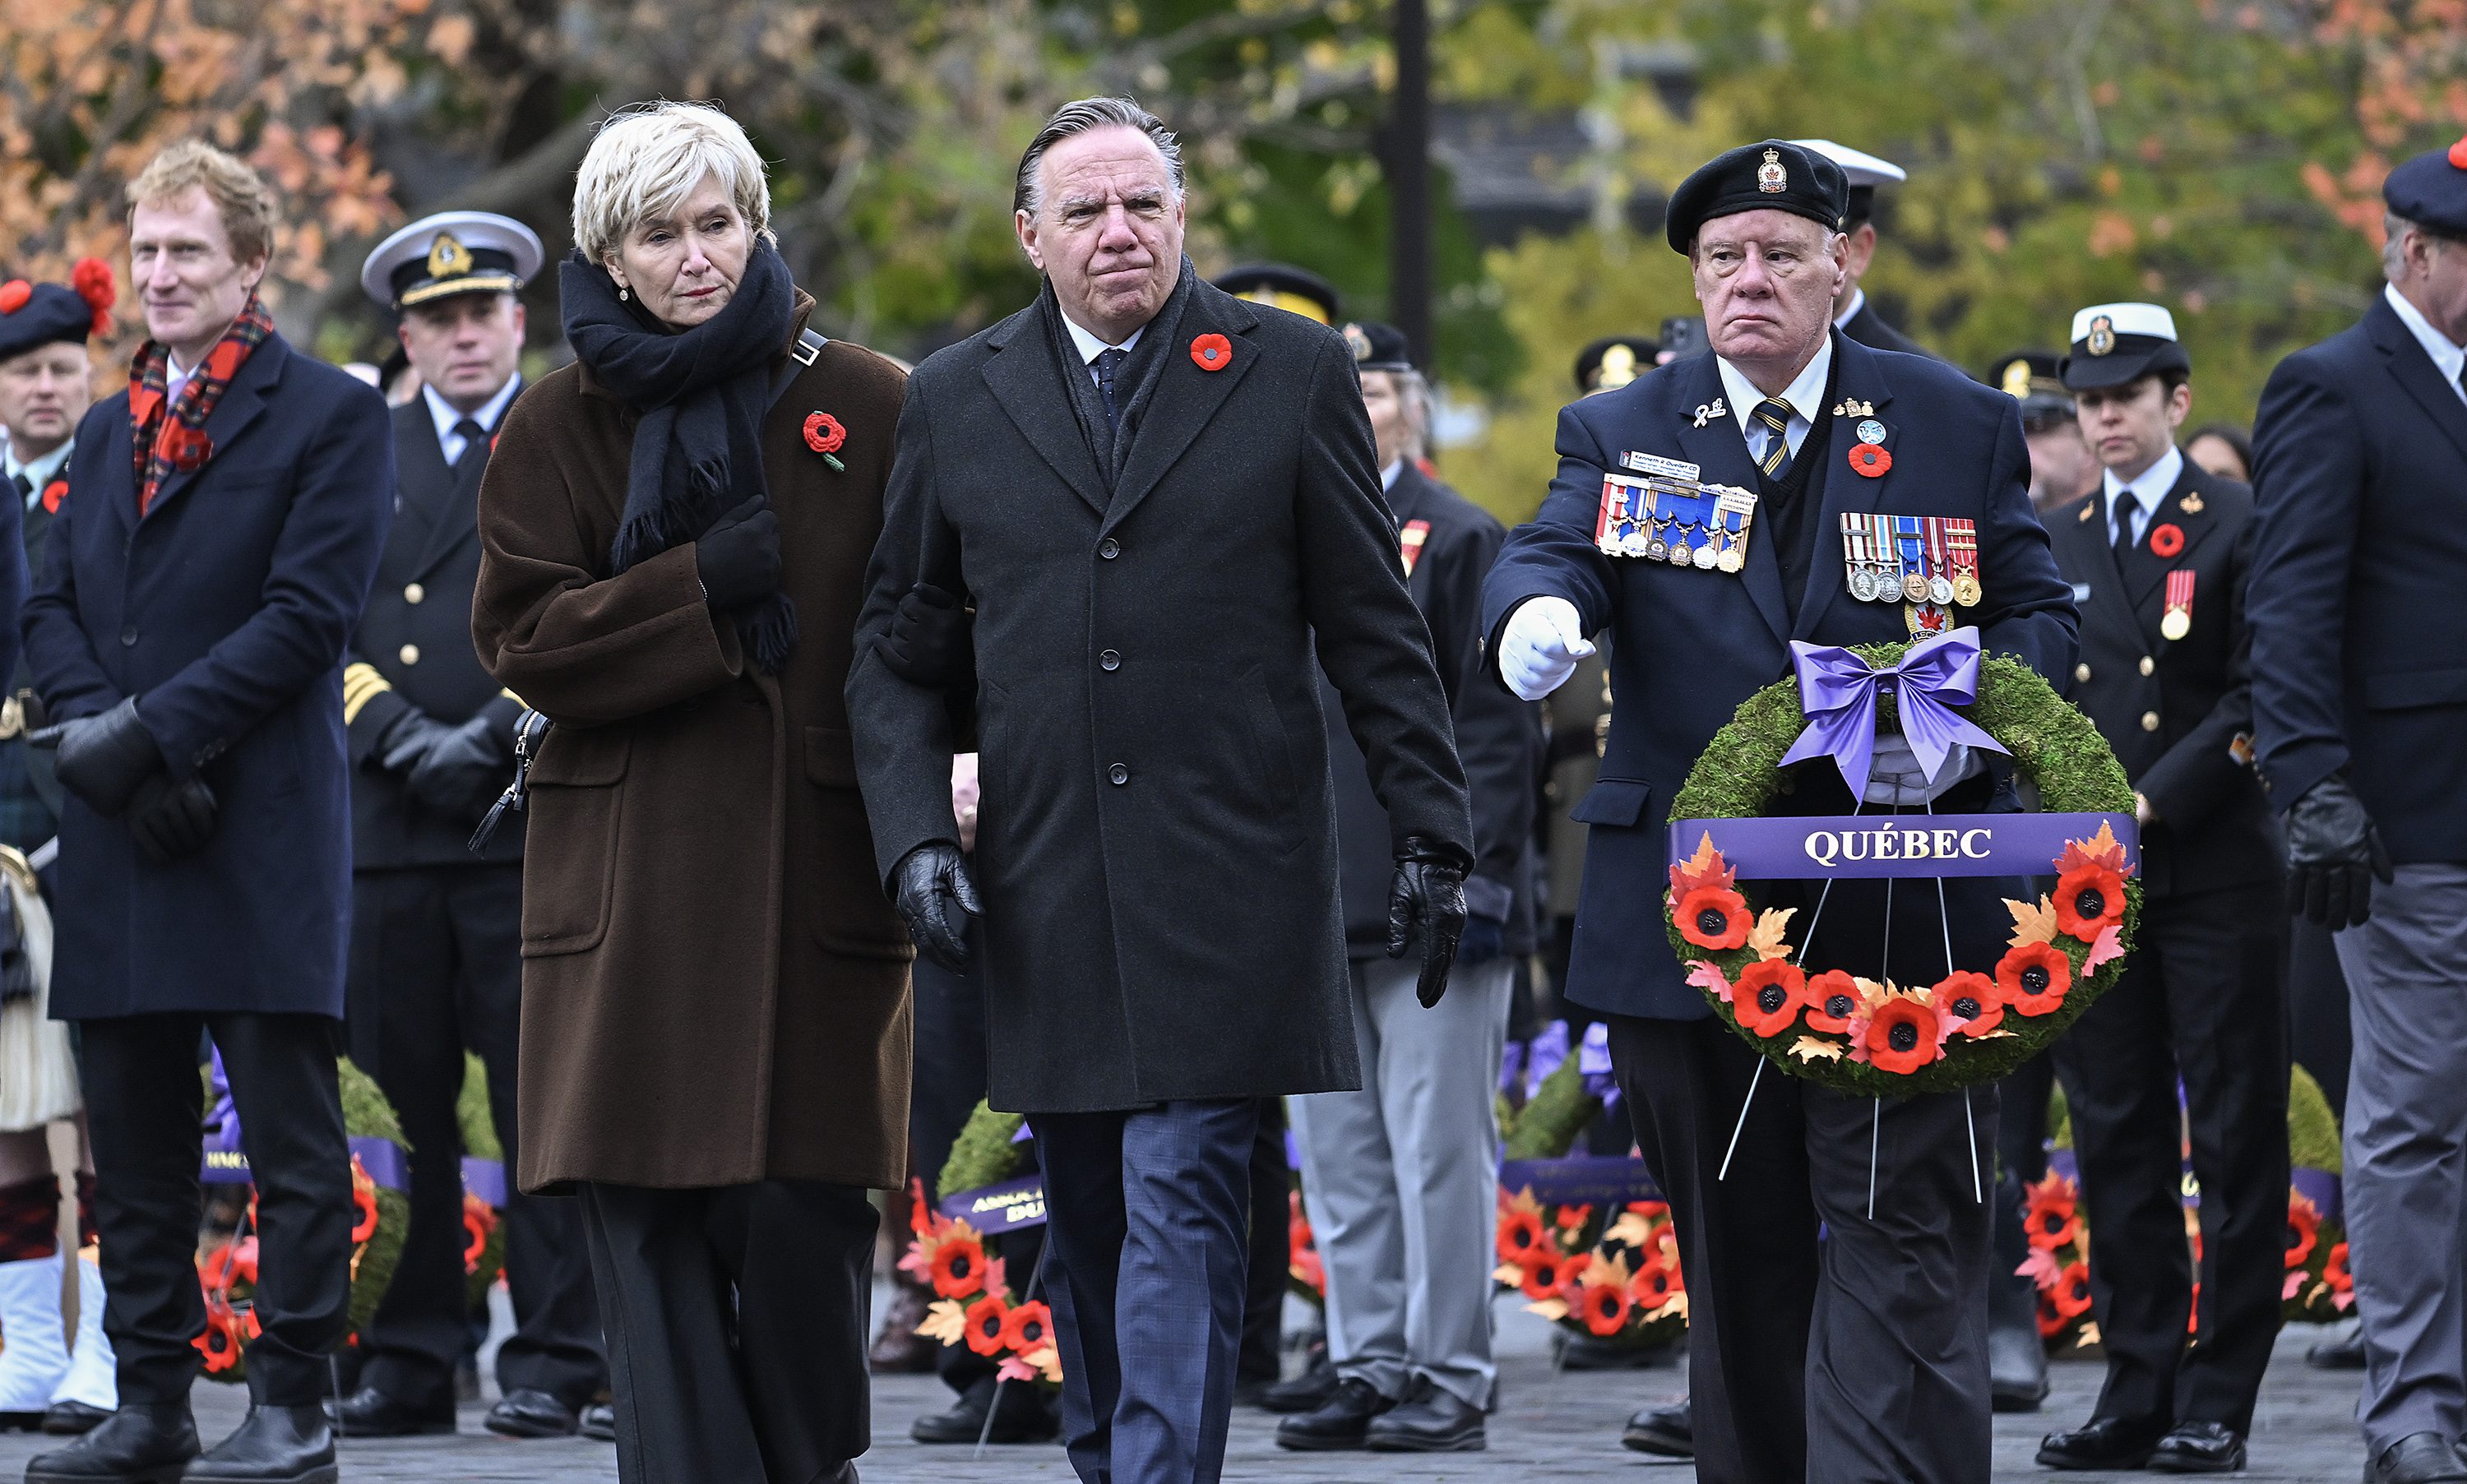 Scenes from Remembrance Day: Legault, Plante honour veterans at Montreal ceremony